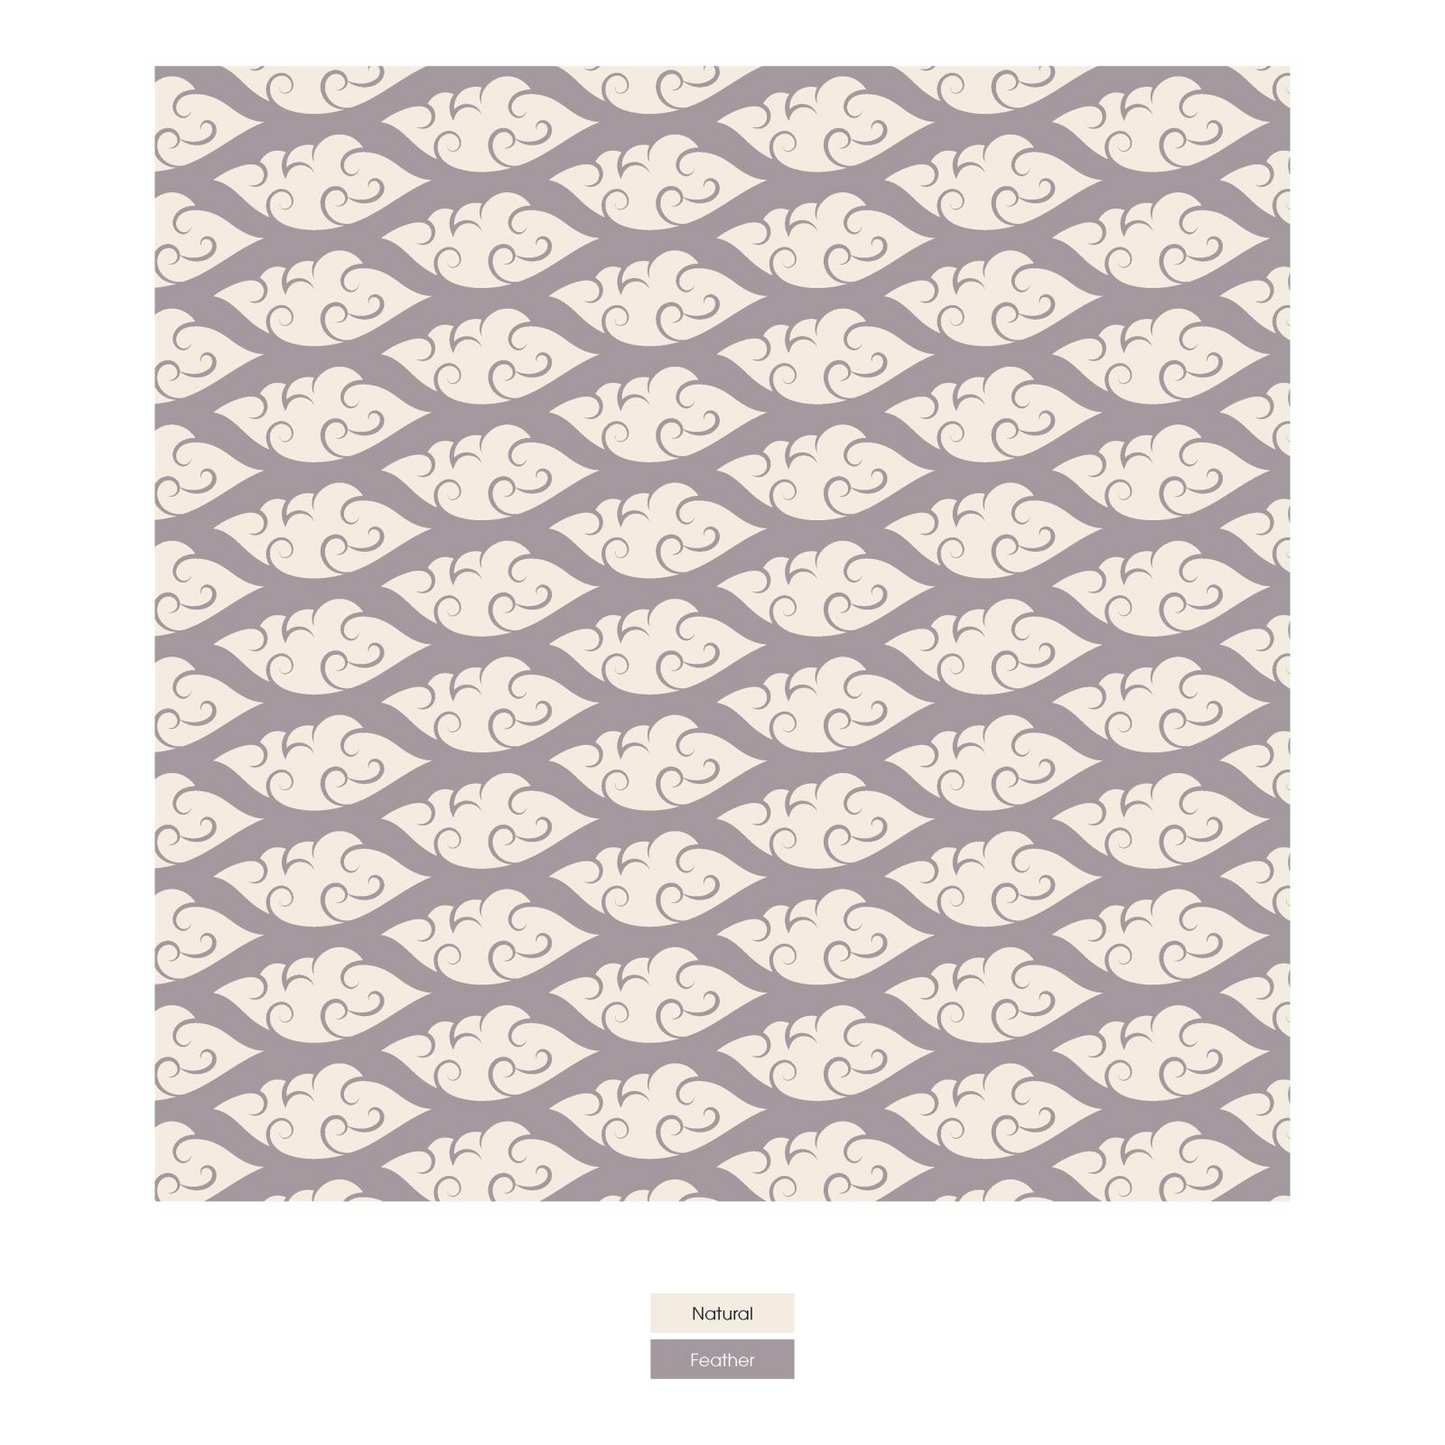 Kickee Pants Print Quilted Throw Blanket: Feather Cloudy Sea/Spring Sky Octopus Anchor